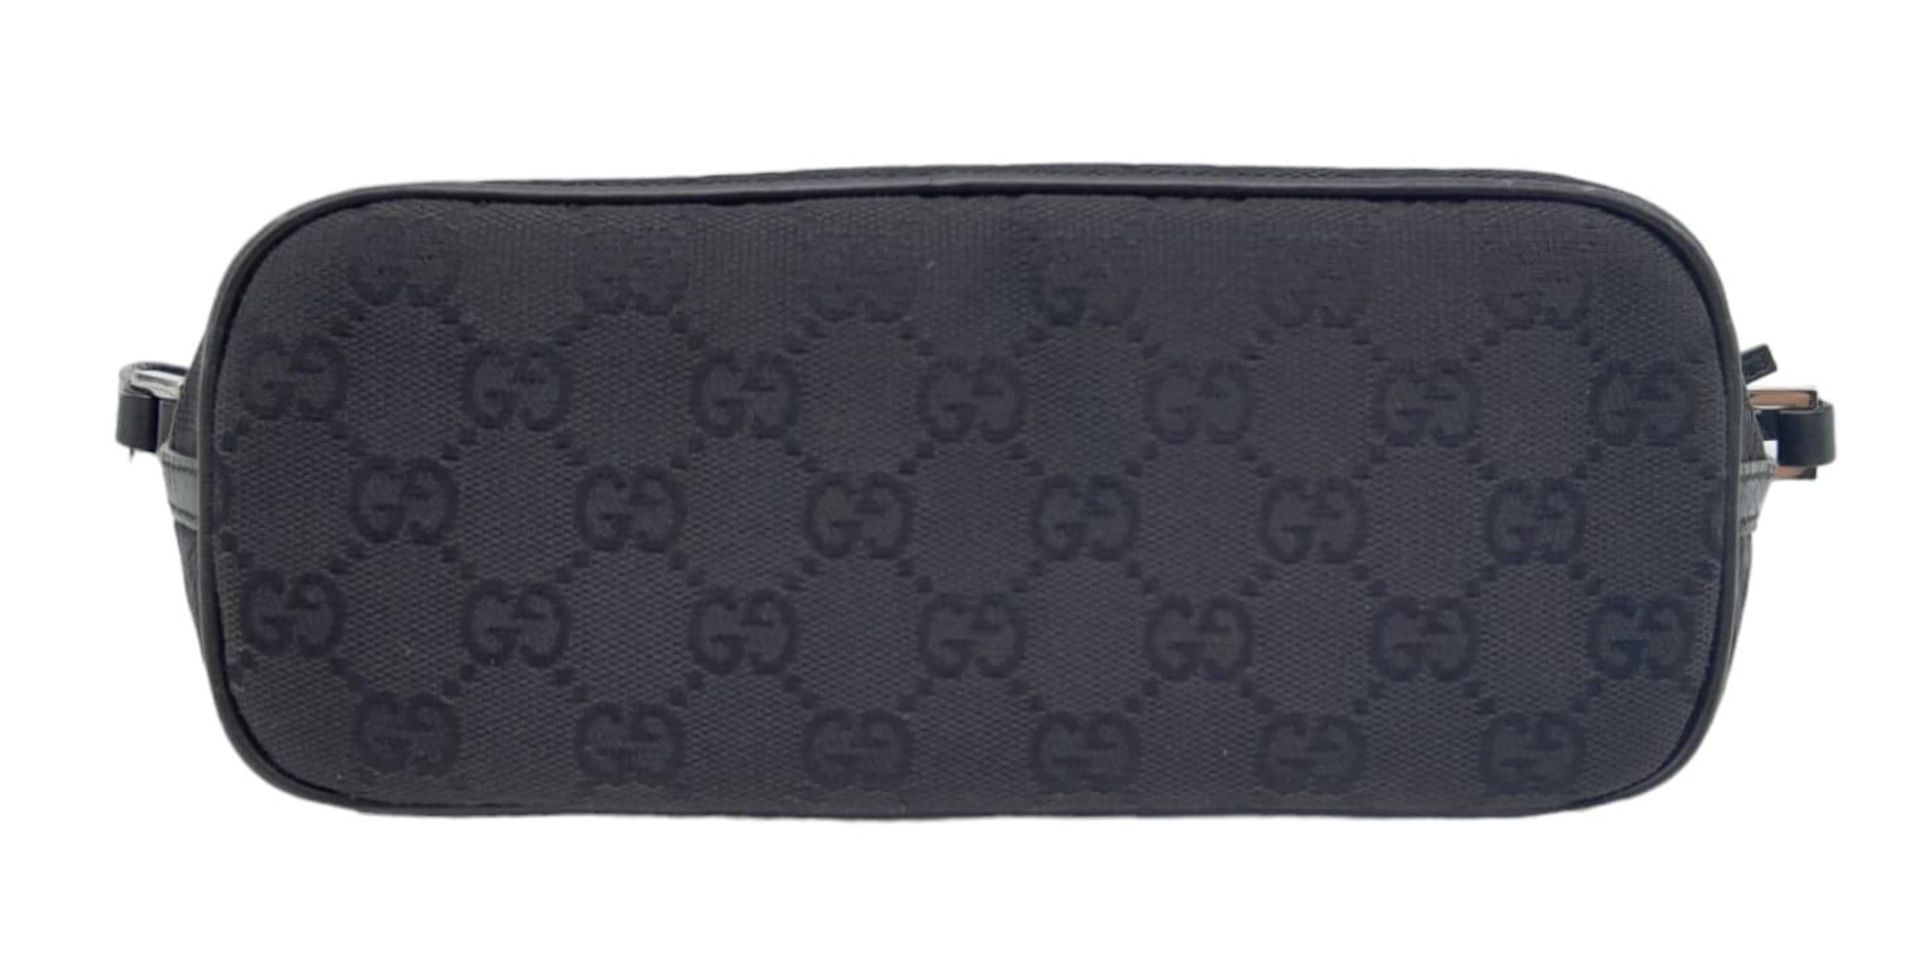 A Gucci Black Monogram Pochette Boat Bag. Textile exterior with black and silver-toned hardware, - Image 4 of 7